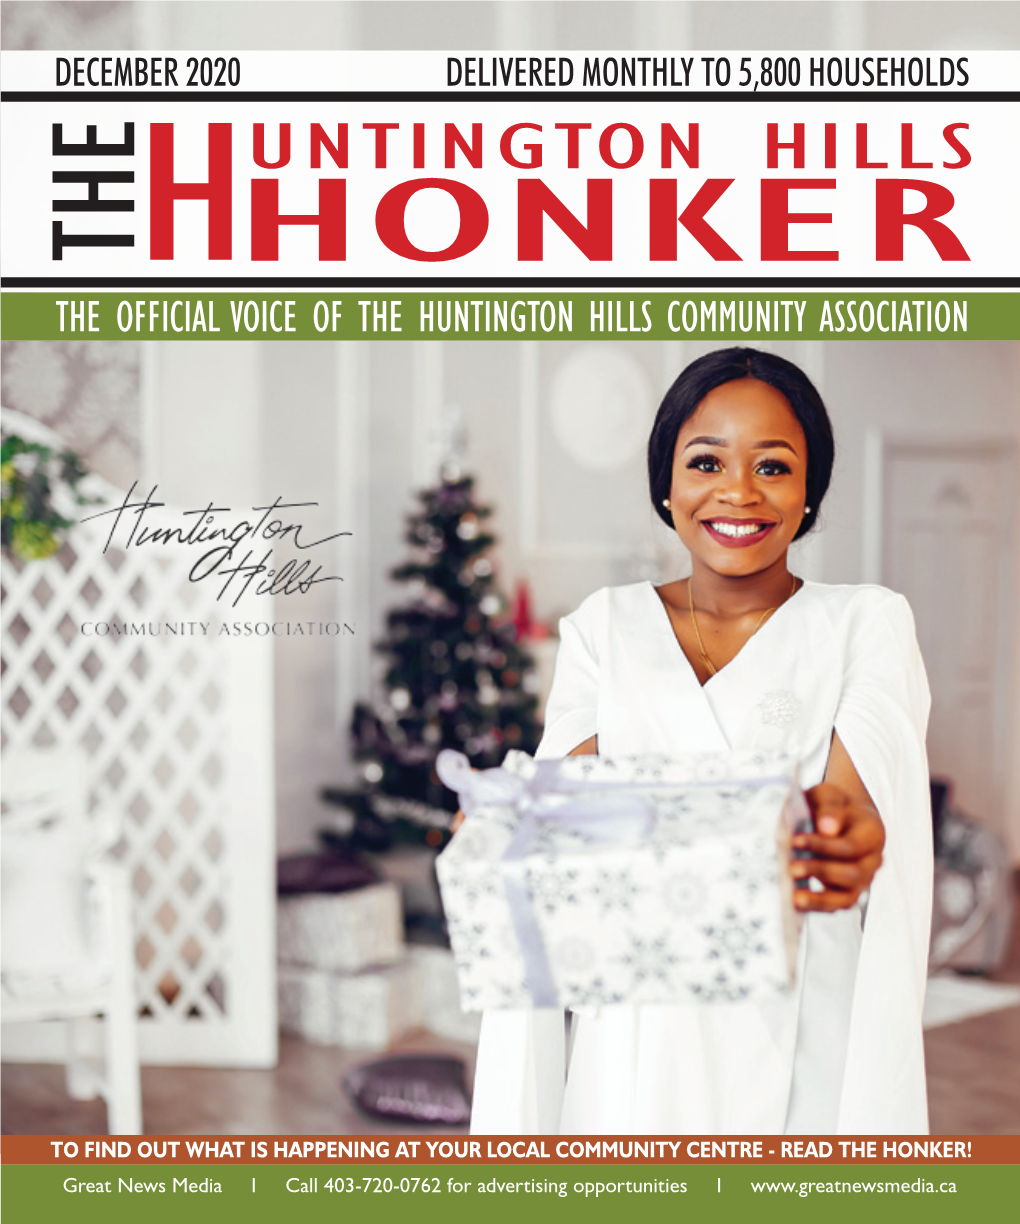 THE OFFICIAL VOICE of the HUNTINGTON HILLS COMMUNITY ASSOCIATION Cambridge Manor